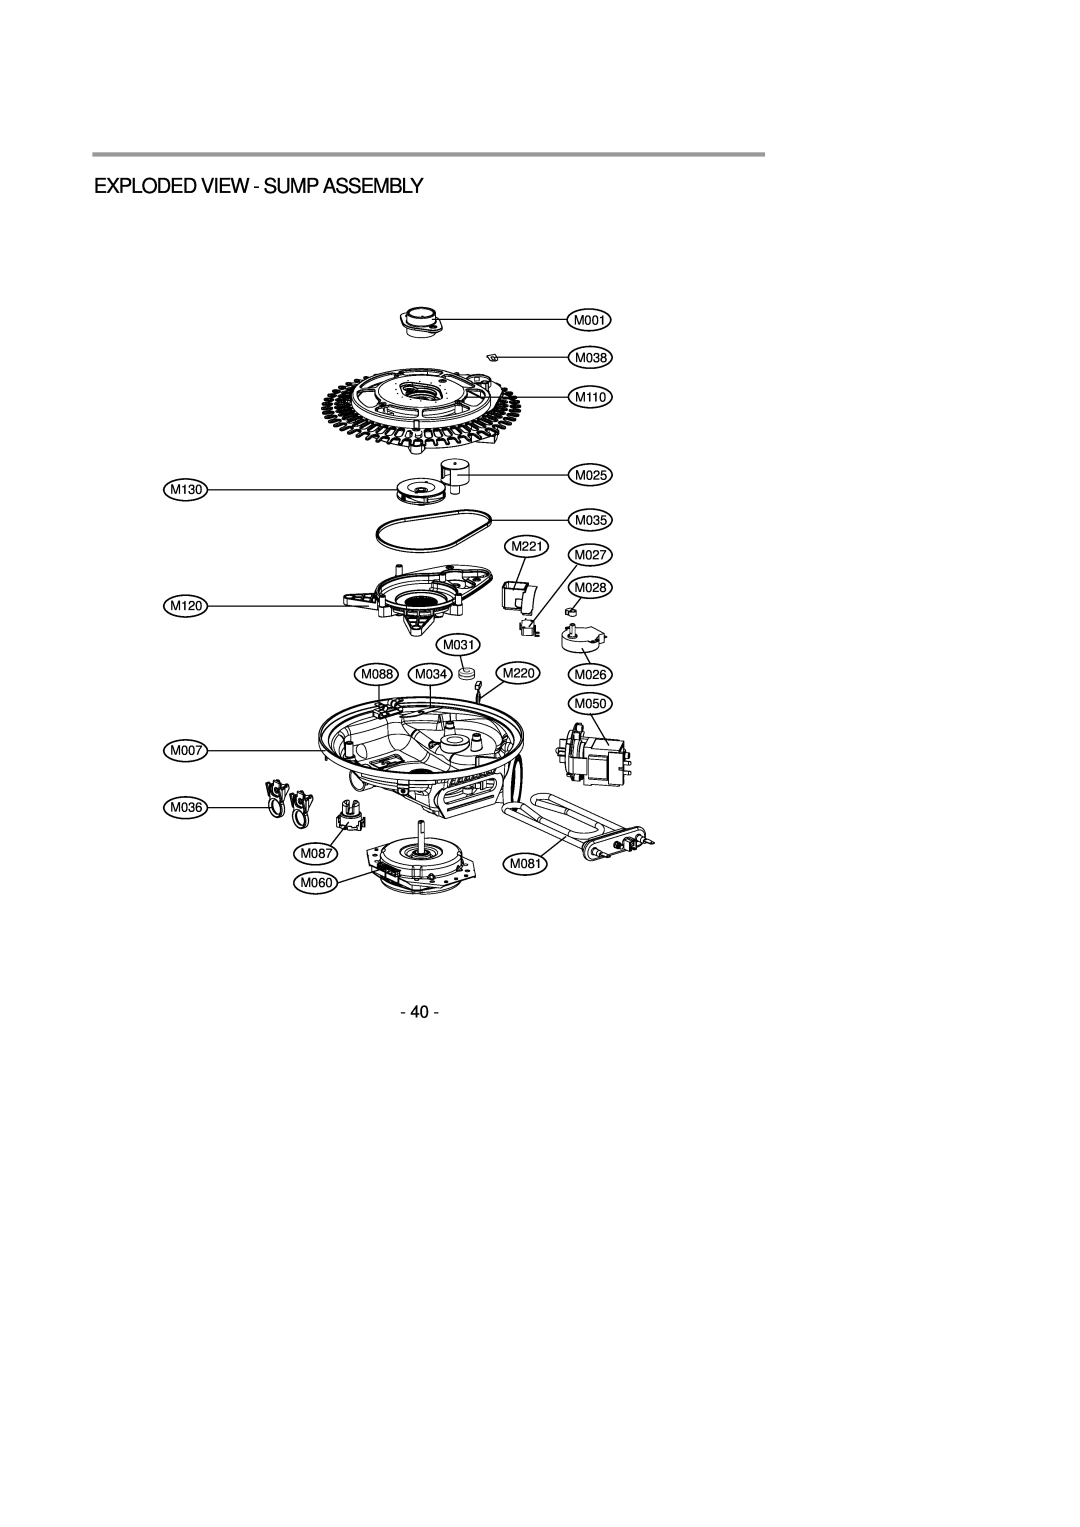 LG Electronics LDS4821(WW Exploded View - Sump Assembly, M130 M221 M120 M031 M088 M034 M220 M007 M036 M087, M081 M060 